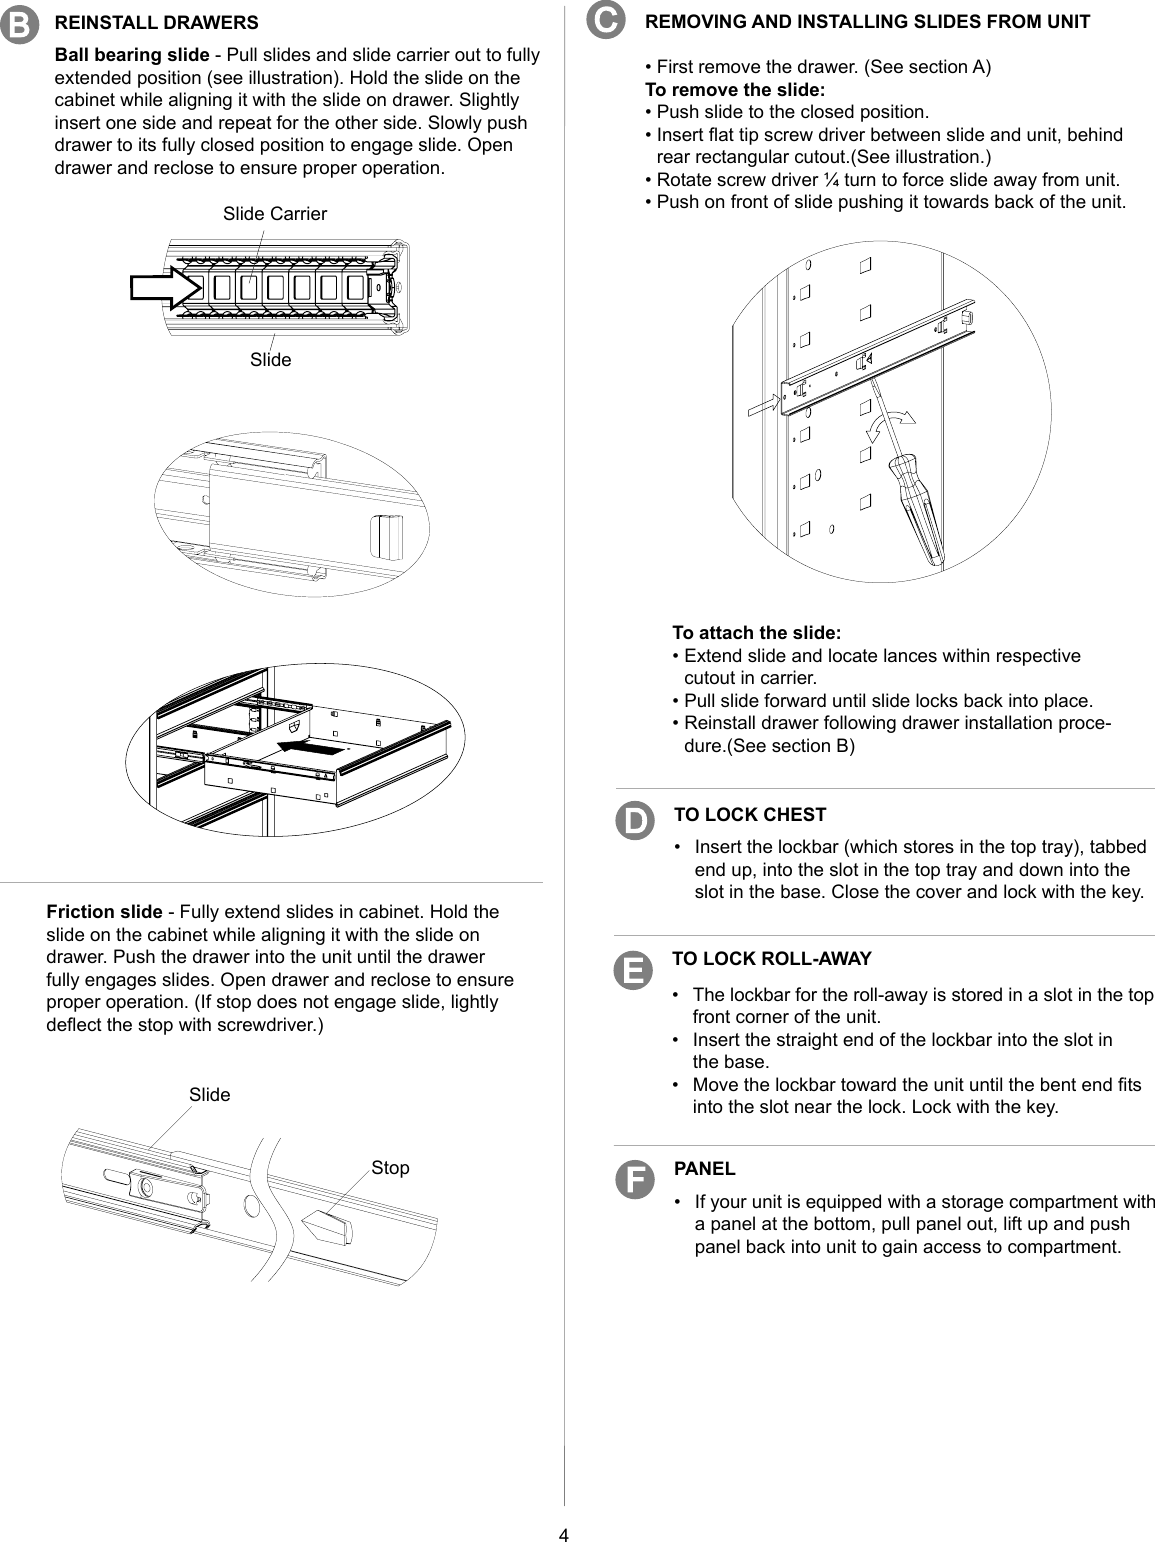 Page 4 of 8 - Craftsman Craftsman-5-Drawer-Standard-Duty-Ball-Bearing-Tool-Center-Black-Use-And-Care-Manual-  Craftsman-5-drawer-standard-duty-ball-bearing-tool-center-black-use-and-care-manual